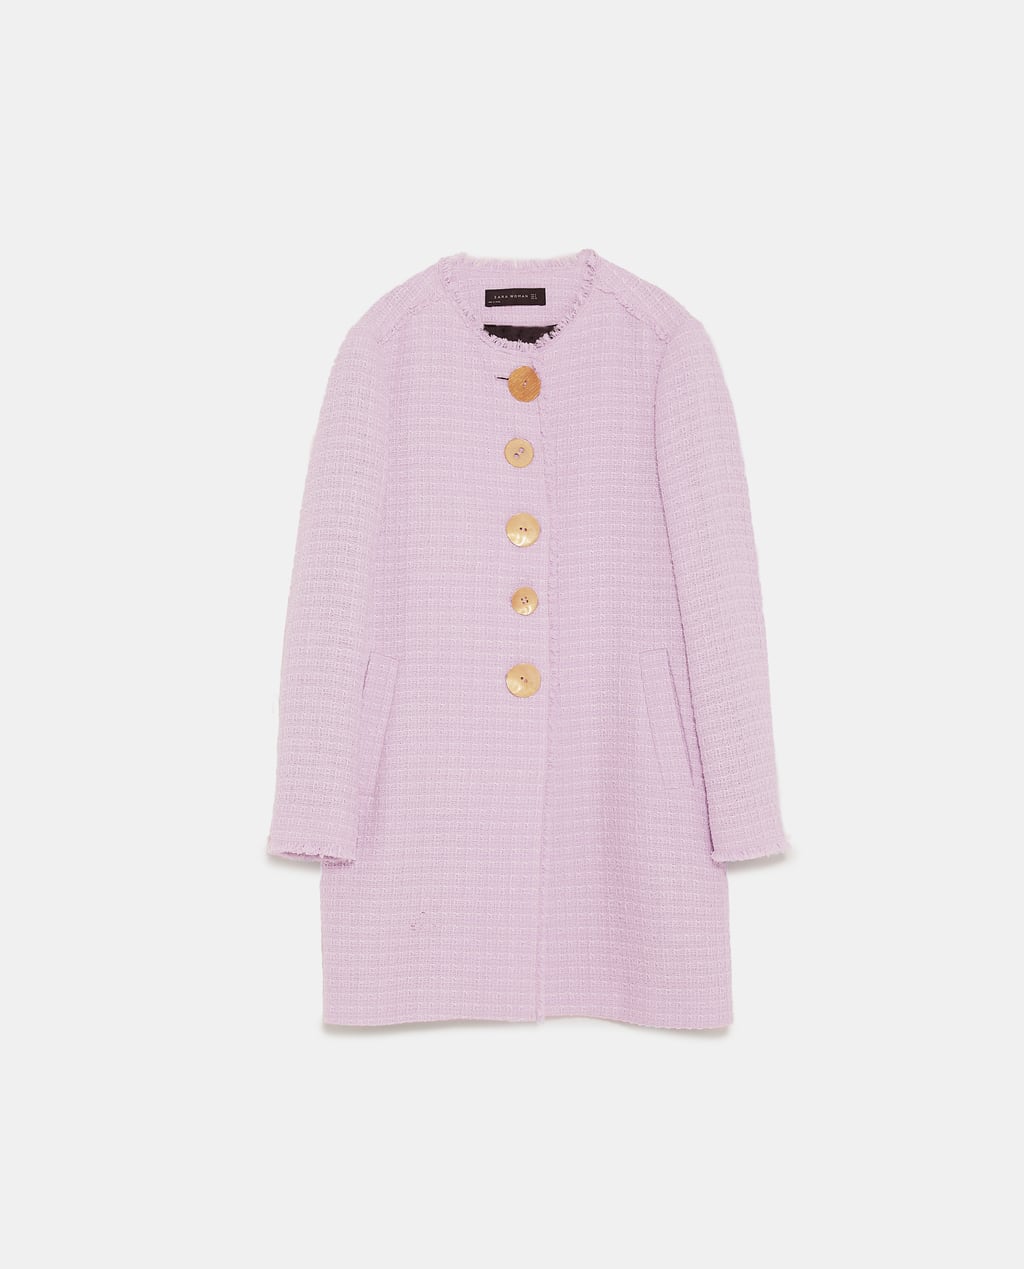 Buttoned Coat, $179 from Zara